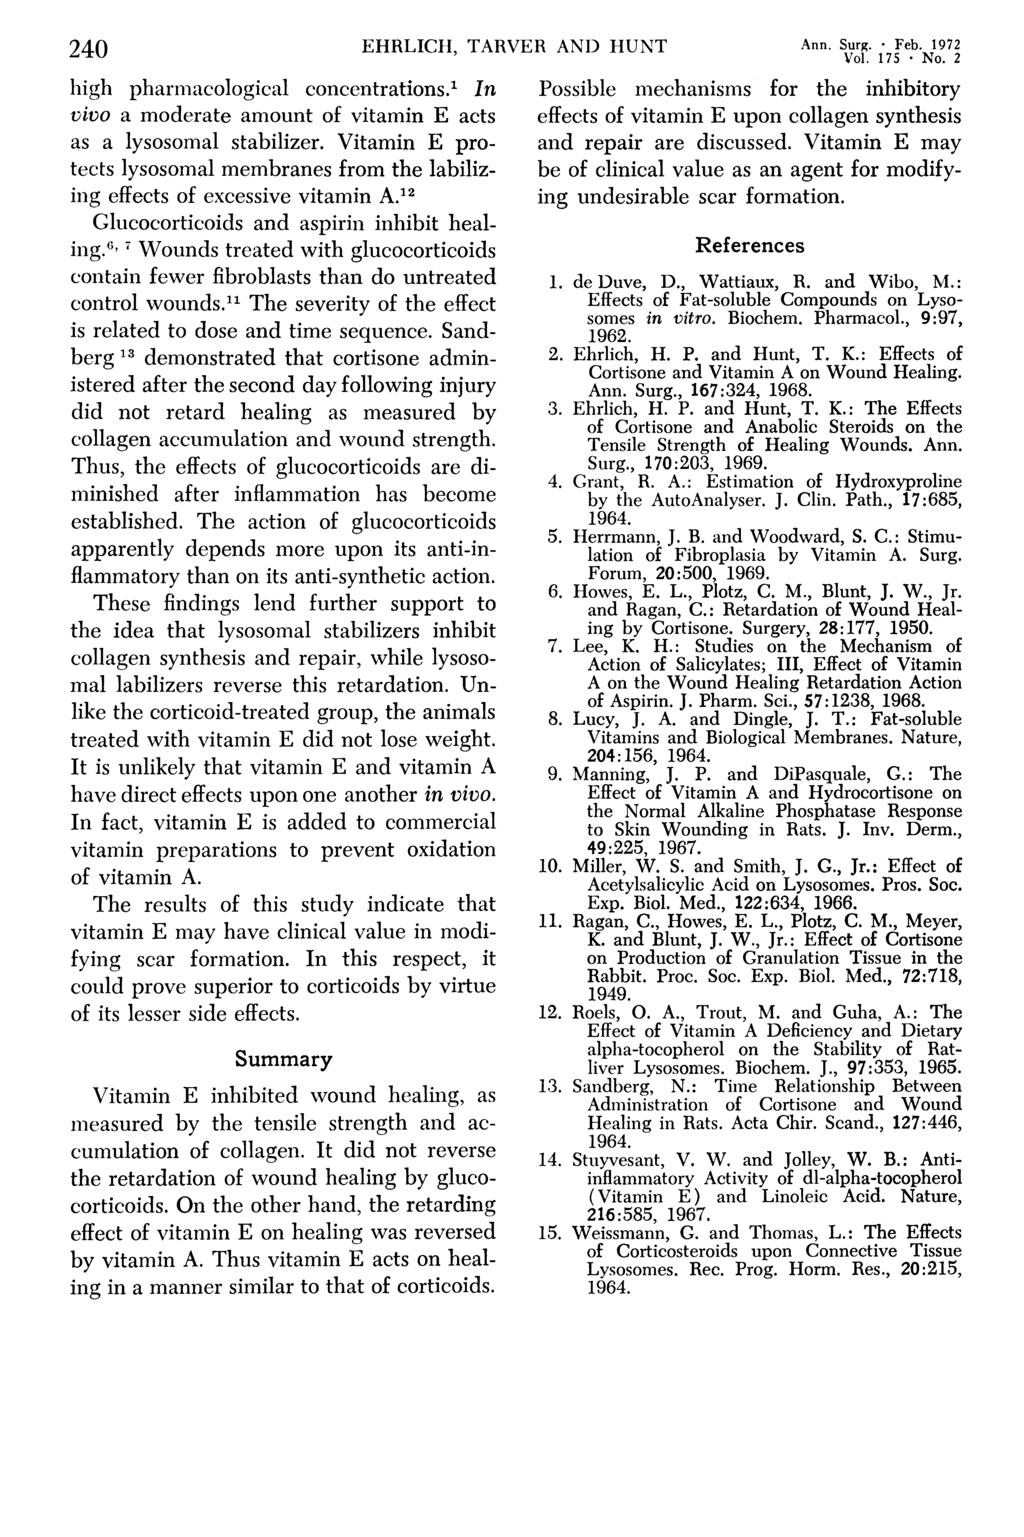 240 EHRLICH, TARVER AND HUNT Ann. Surg. ; Feb. 1972 high pharmacological concentrations.